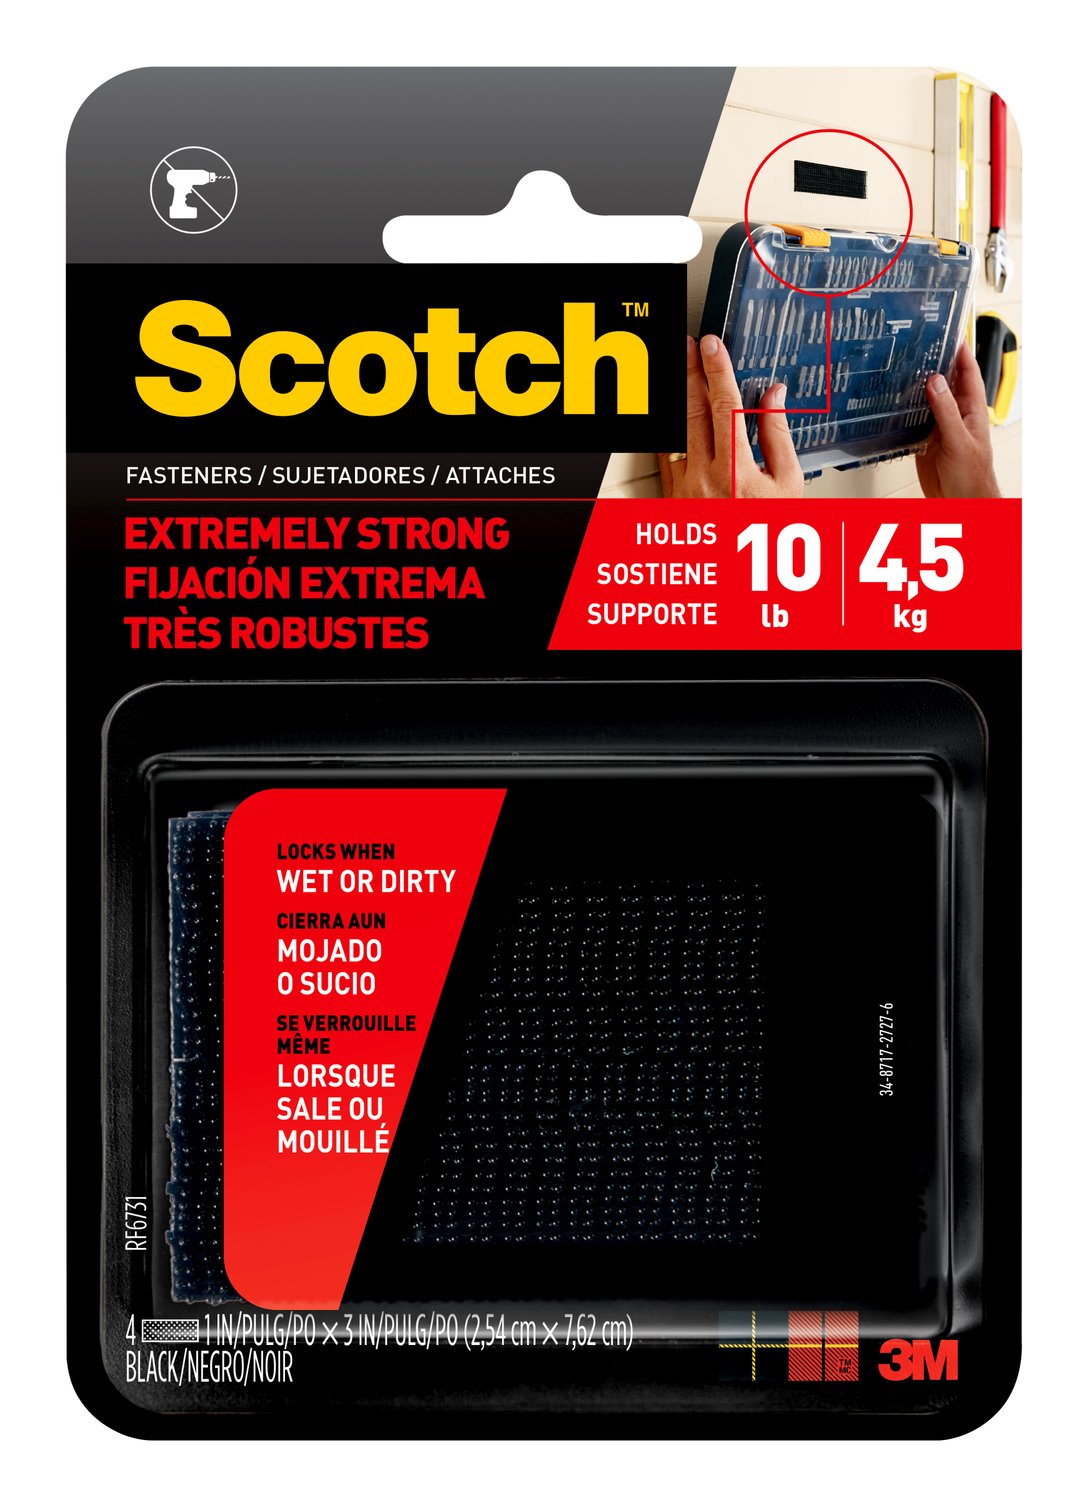 7100055877 - Scotch Extreme Fasteners RF6731, 1 in x 3 in (25,4 mm x 76,2 mm), 2
Sets of Strips, Black